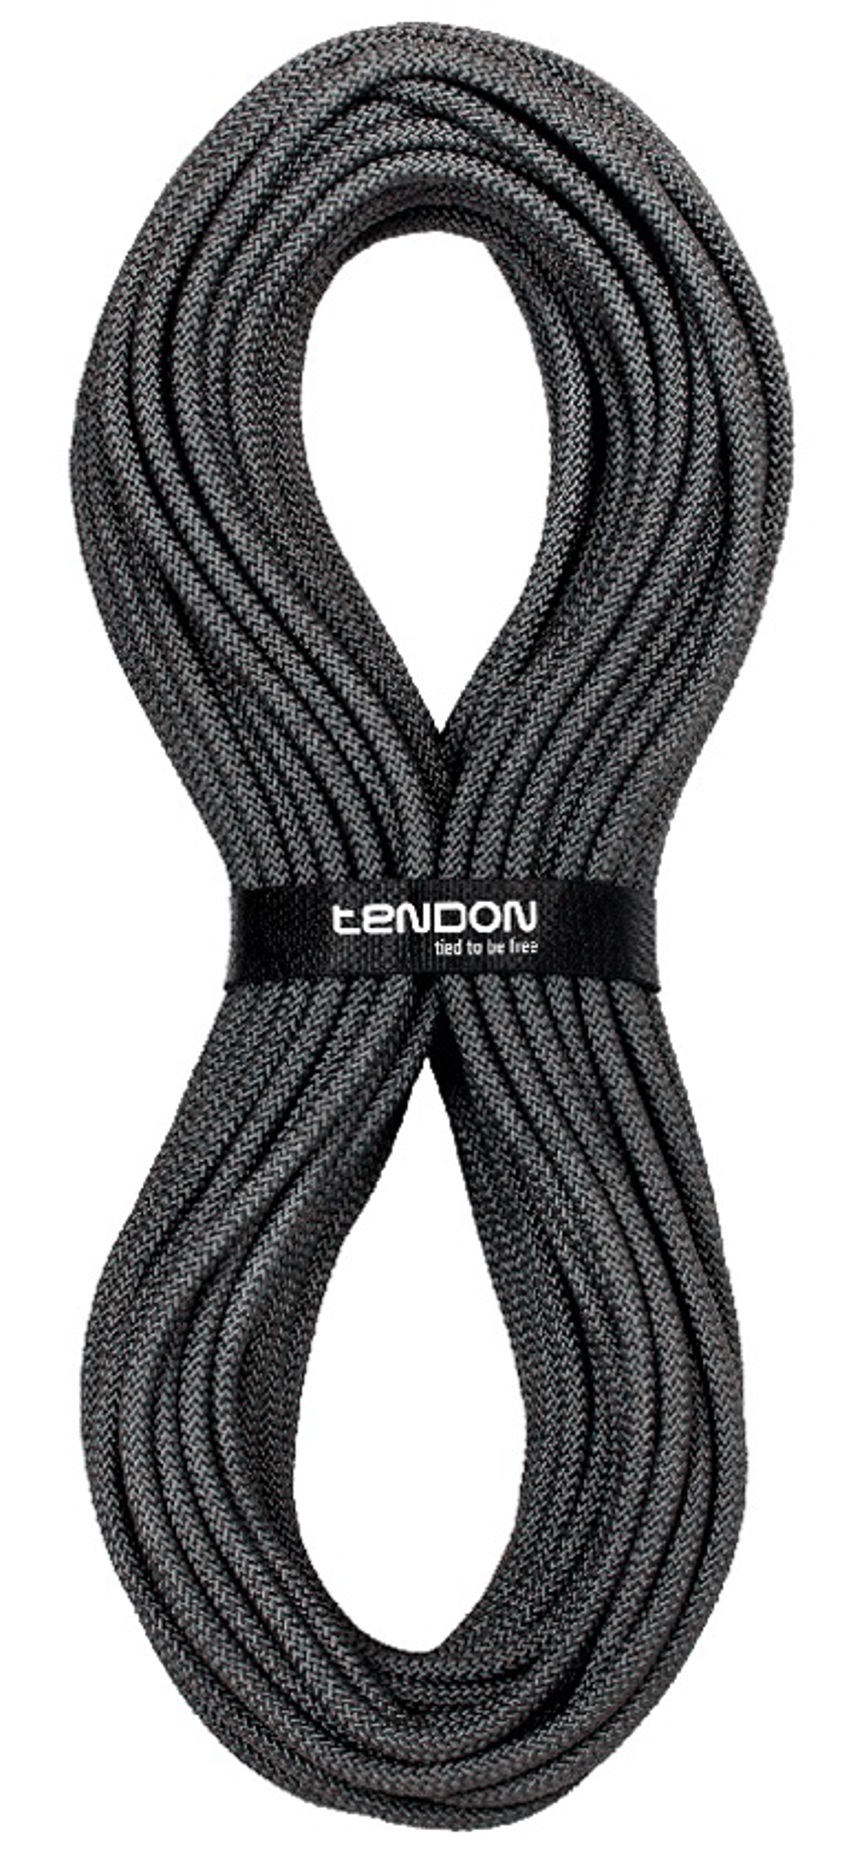 Black Static 10.5mm - Ropes cut to any length - Price per meter